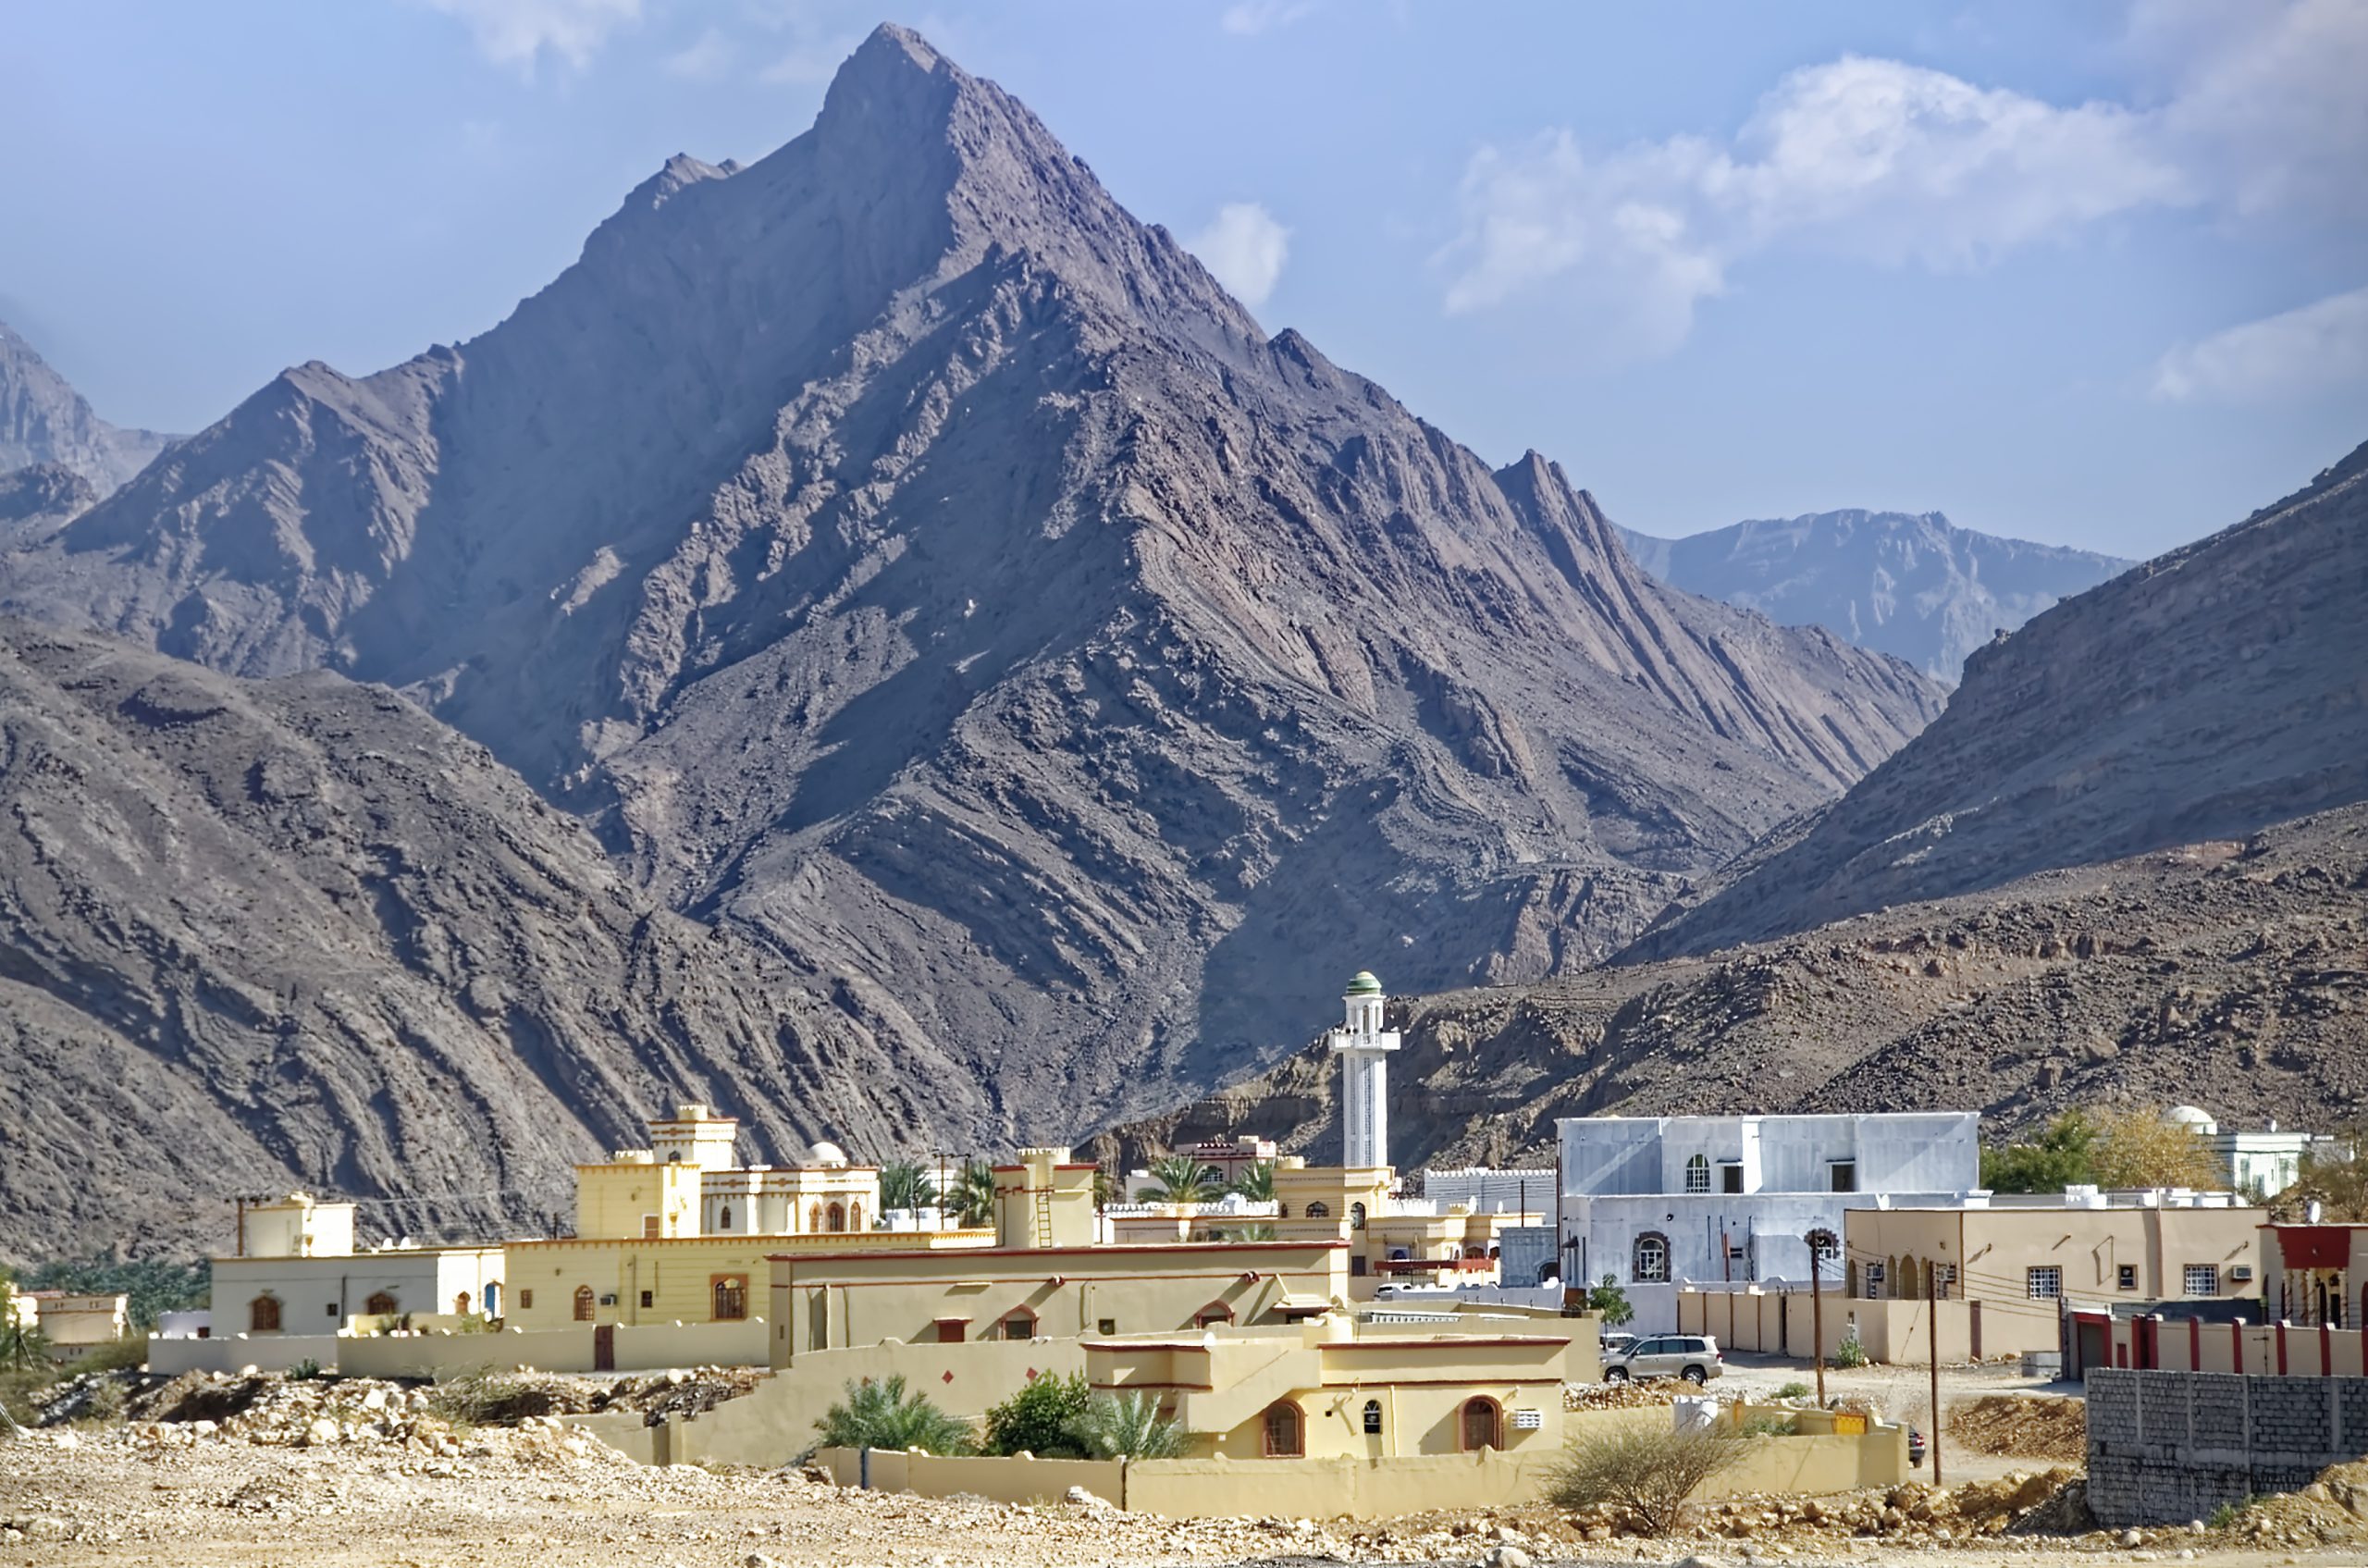 View of a rural area in Oman